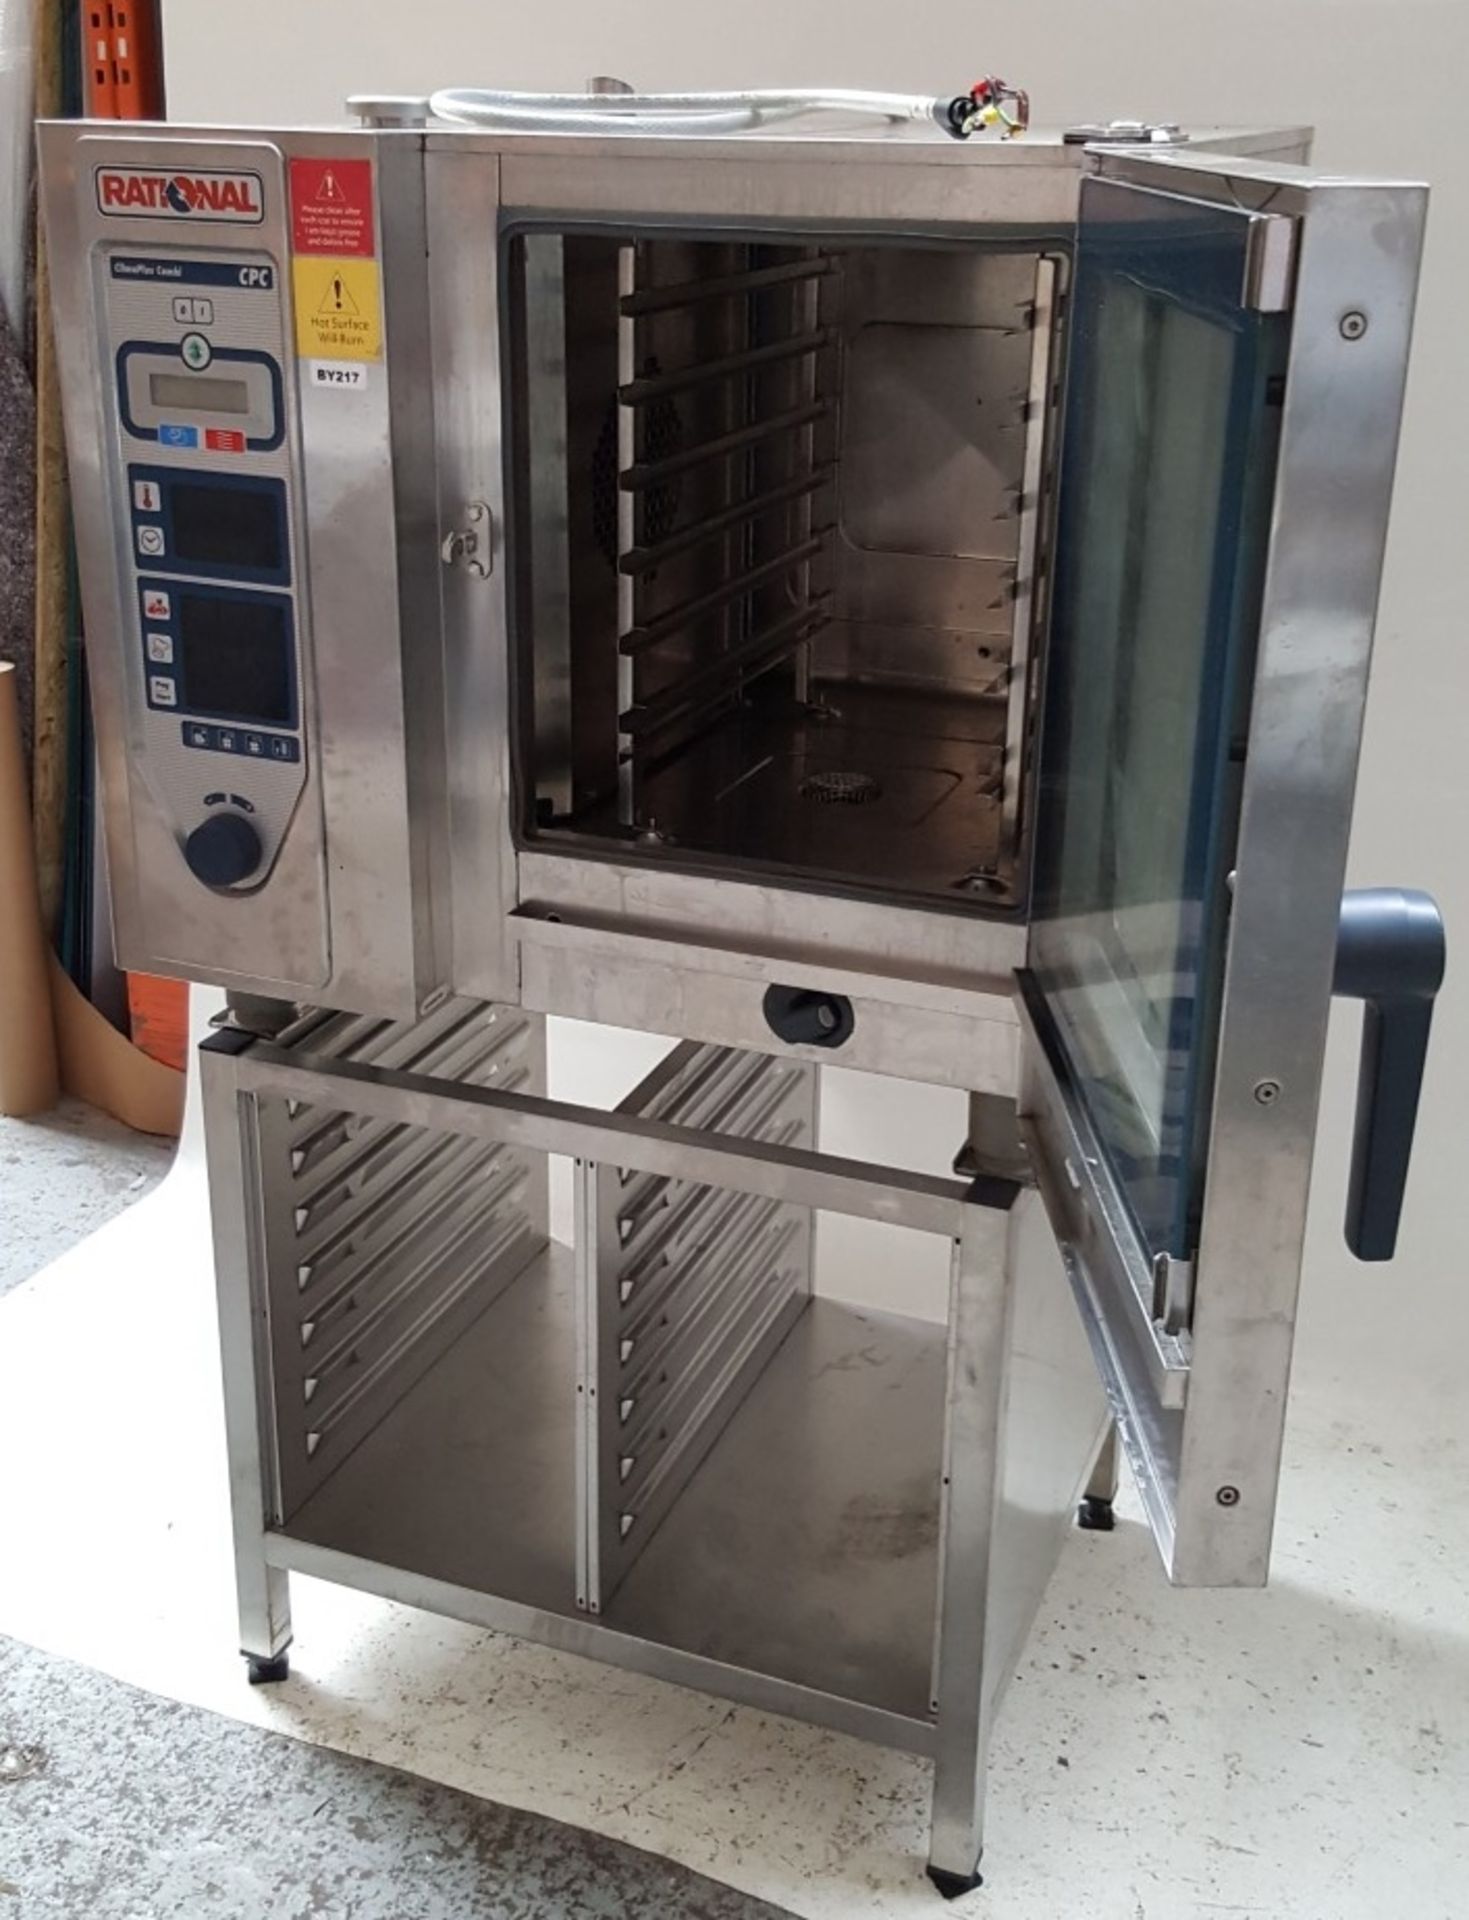 1 x Rational Combi Steamer Oven Model CPC 61 240V 3 Phase With Stand - Ref BY217 - Image 5 of 10